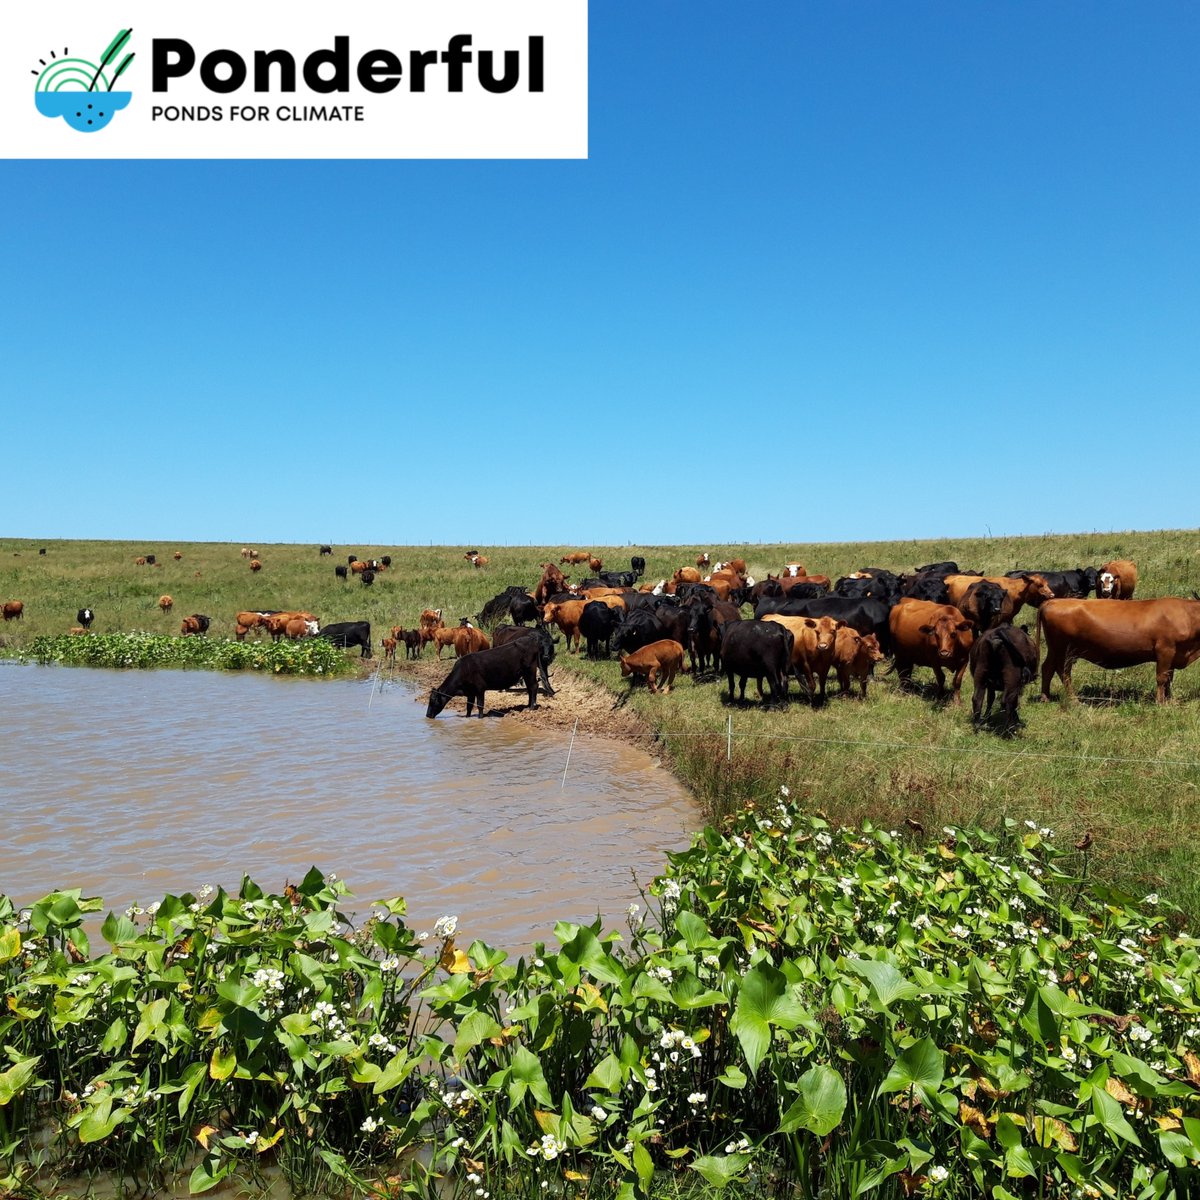 Artificial ponds can be a refuge for freshwater wildlife. Farmers in La Pedrera, Uruguay, rotate cattle so plants can regrow around and inside ponds, increasing macrophytes and waterfowl. This pondscape is being studied by #PONDERFUL partner @Udelaruy ponderful.eu/demo-sites/